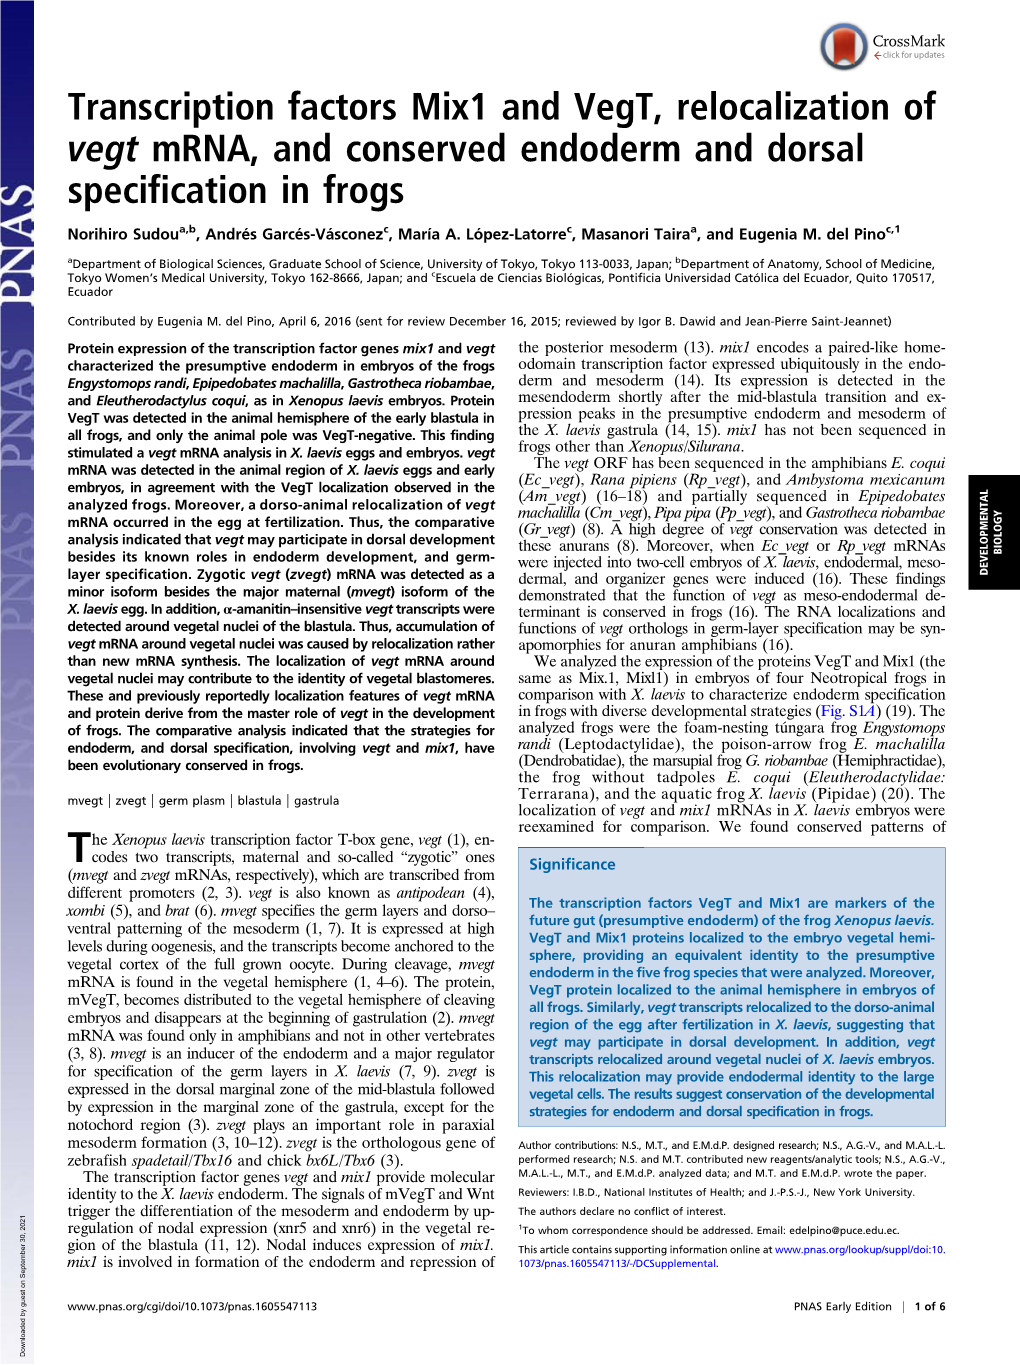 Transcription Factors Mix1 and Vegt, Relocalization of Vegt Mrna, and Conserved Endoderm and Dorsal Specification in Frogs